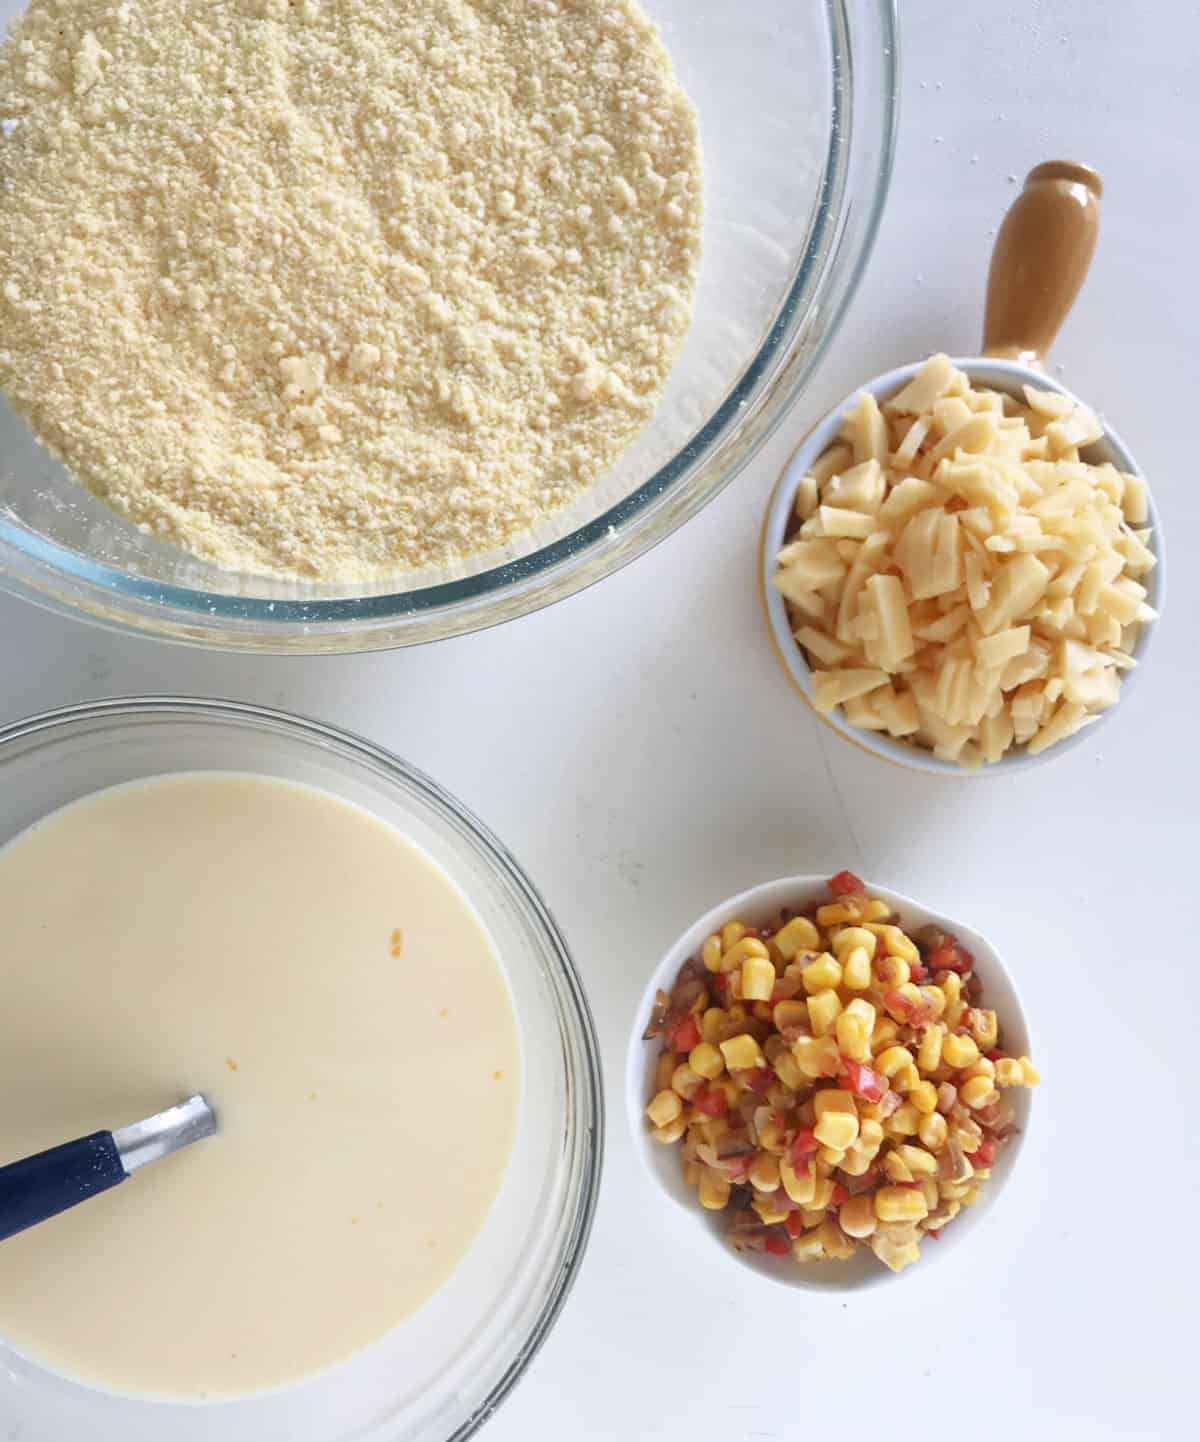 White surface with bowls containing cheese, corn, cornmeal and wet ingredients